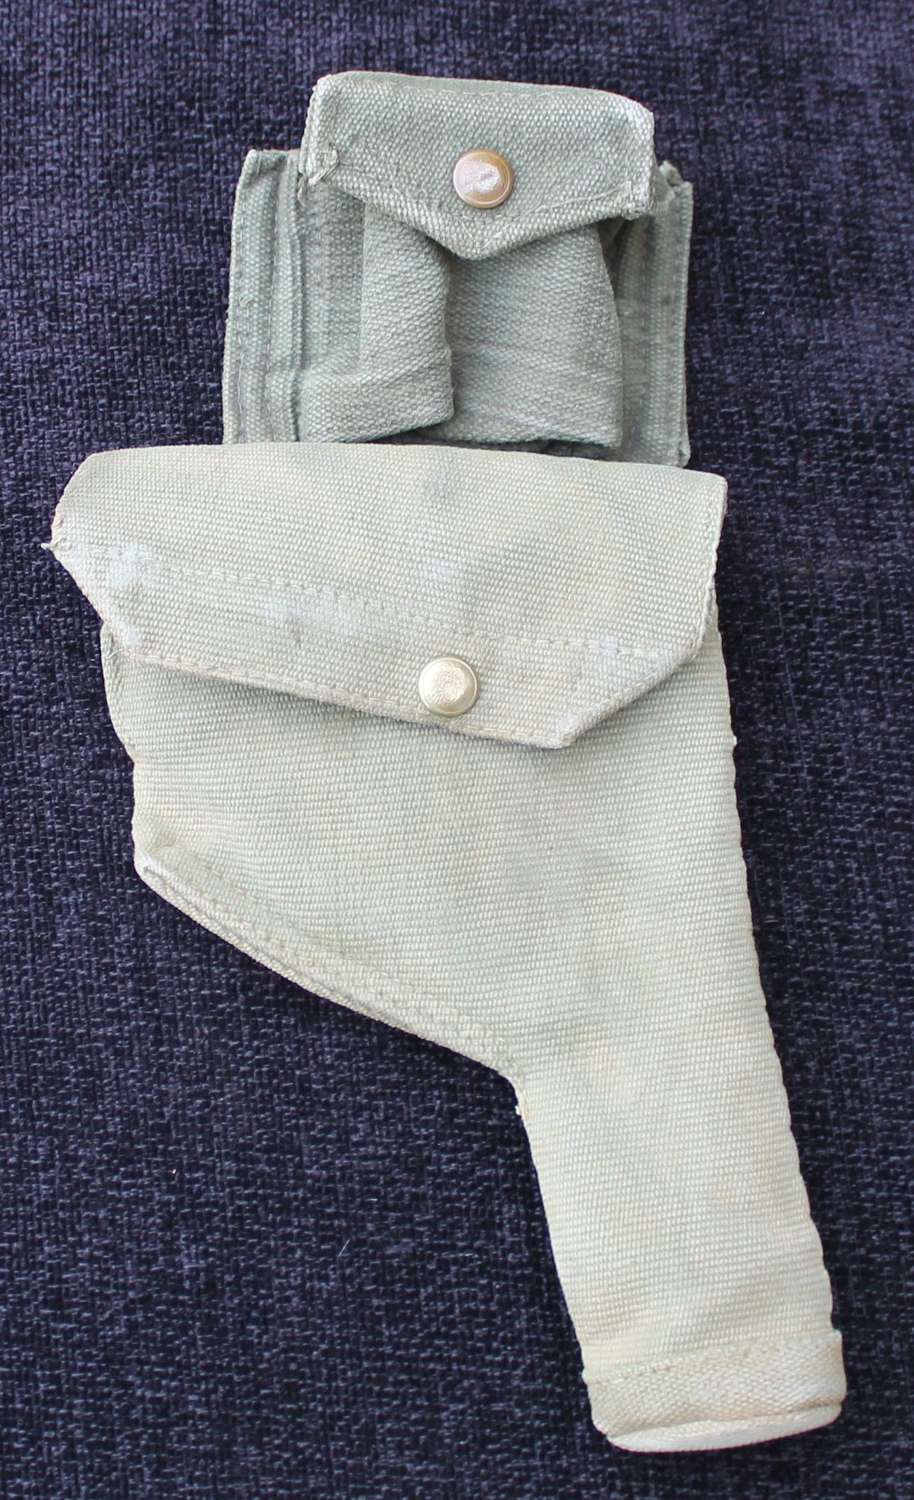 1937 Pattern Webbing Revolver Holster And Ammunition Pouch